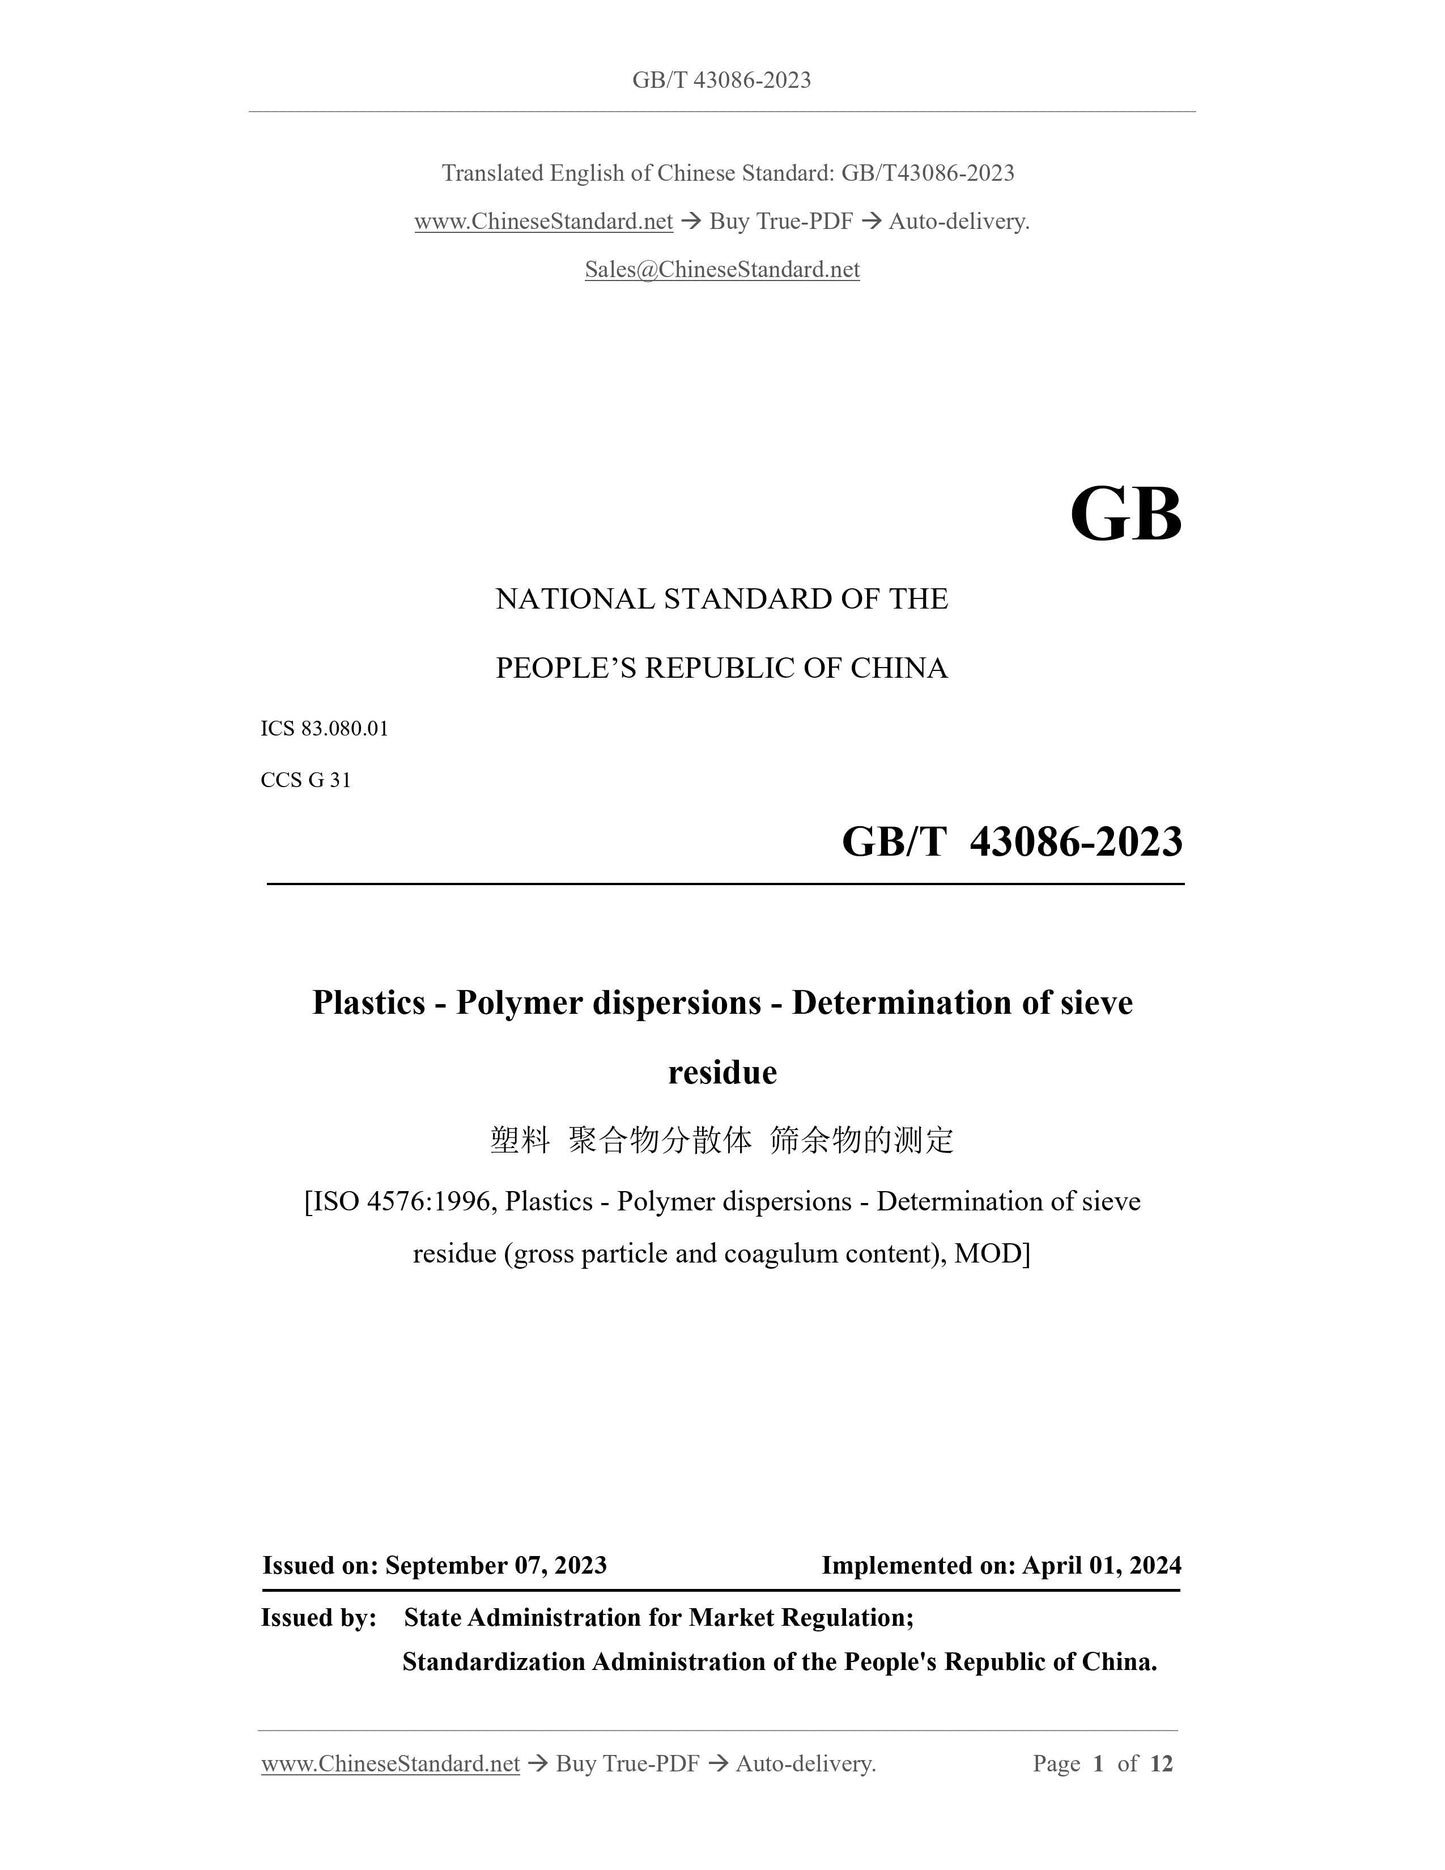 GB/T 43086-2023 Page 1